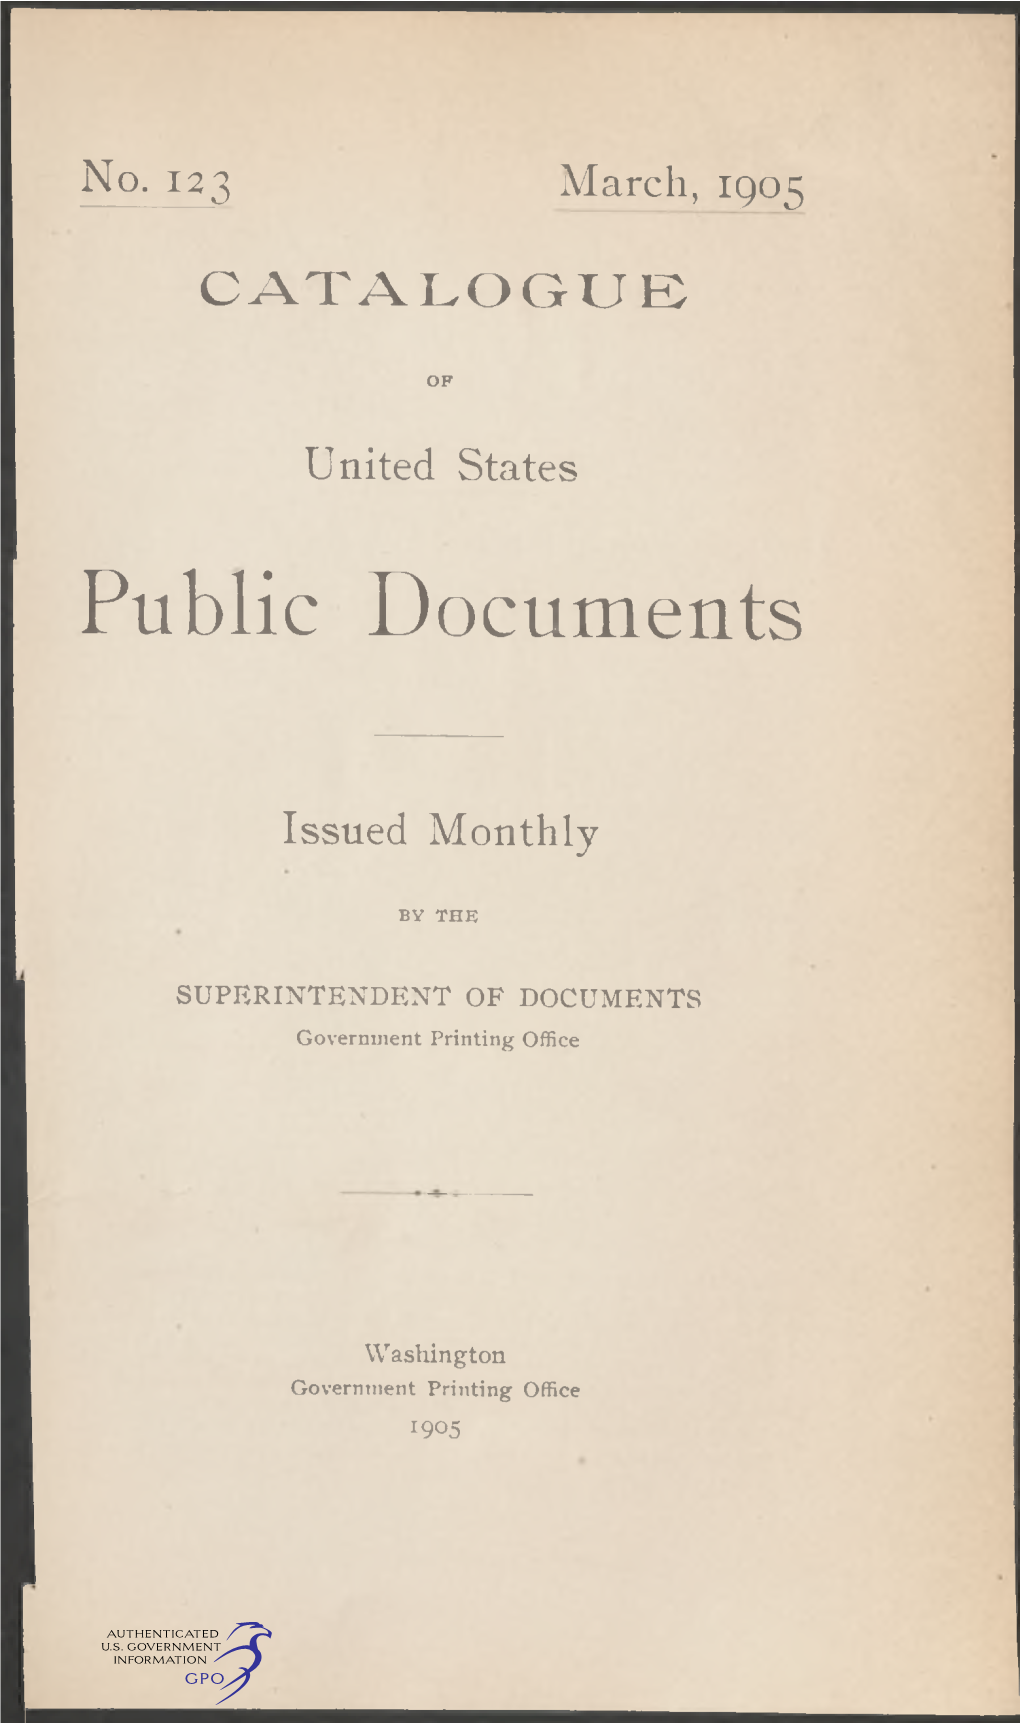 Catalogue of United States Public Documents, March 1905